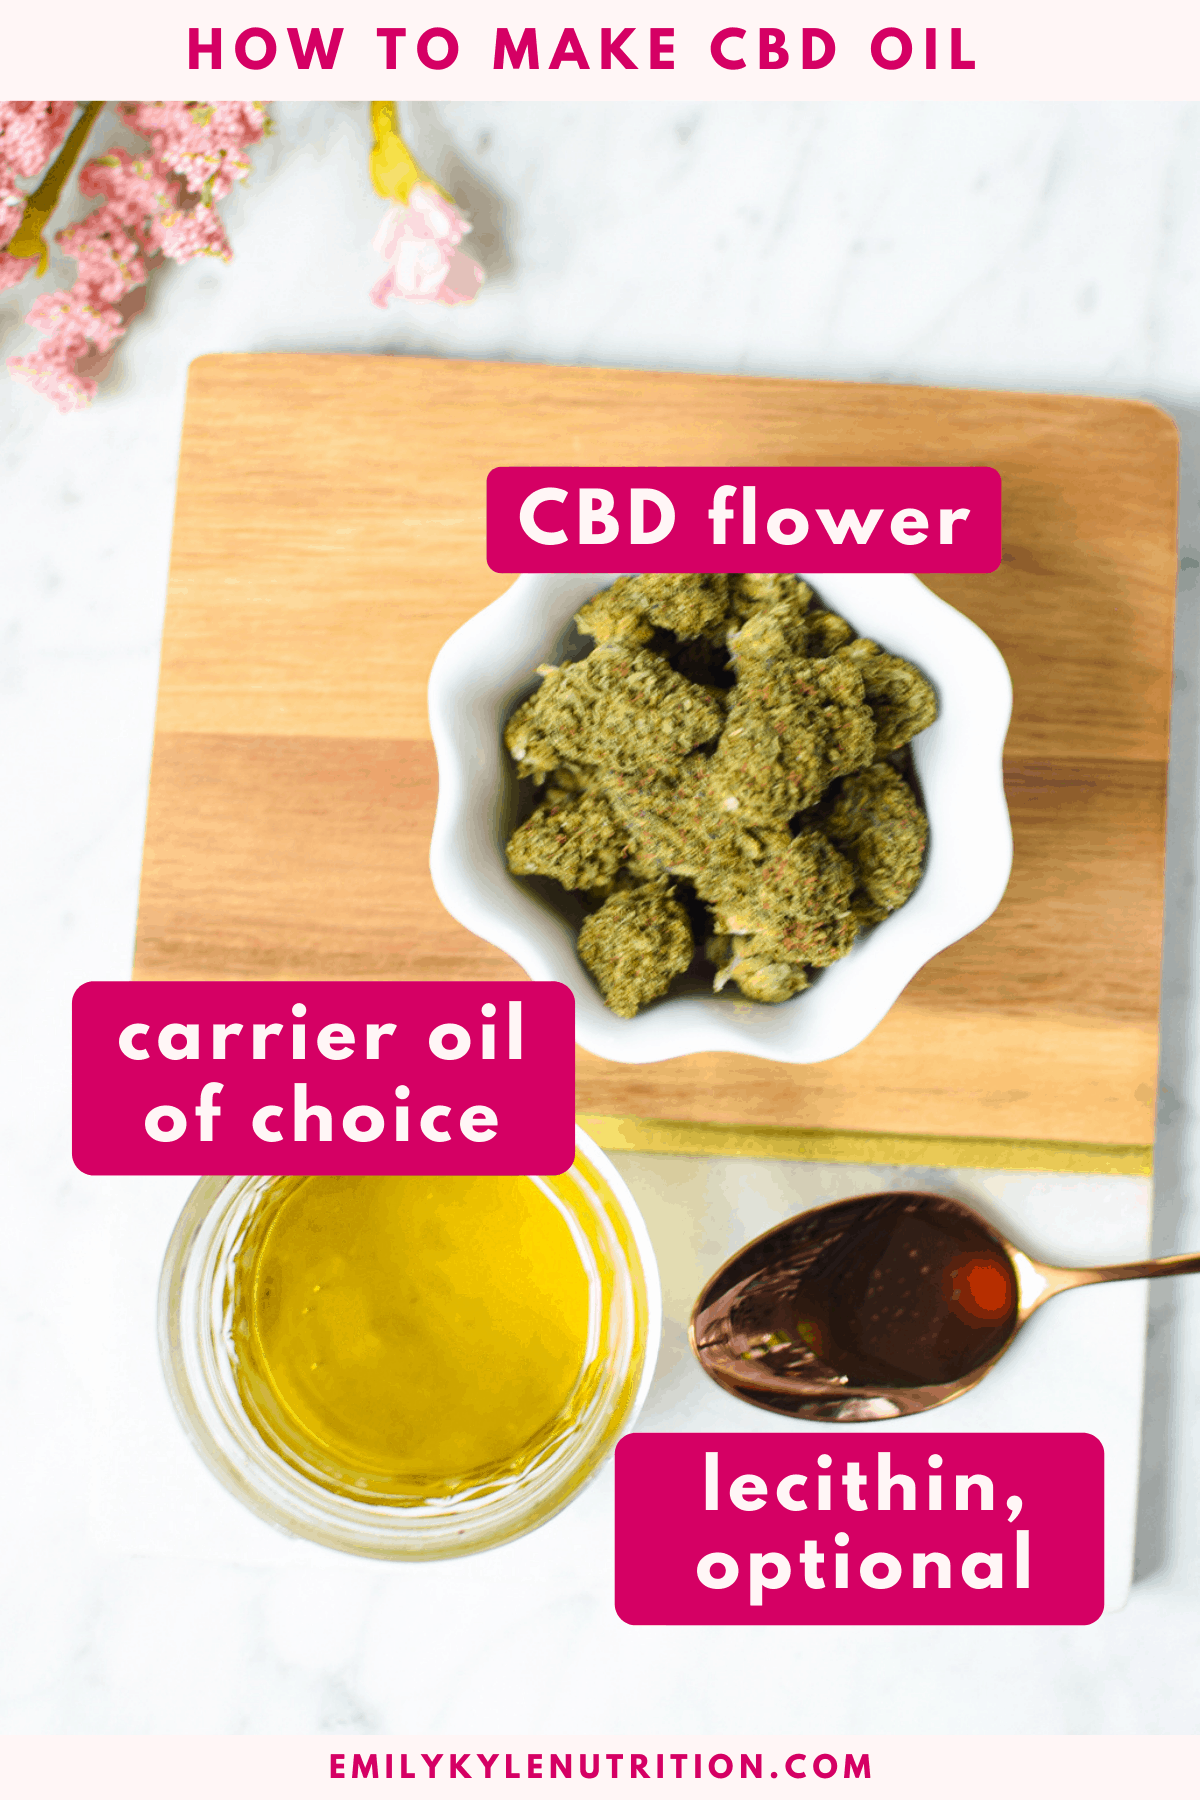 Ingredients collage of cbd flower, oil, and lecithin to make homemade cbd oil